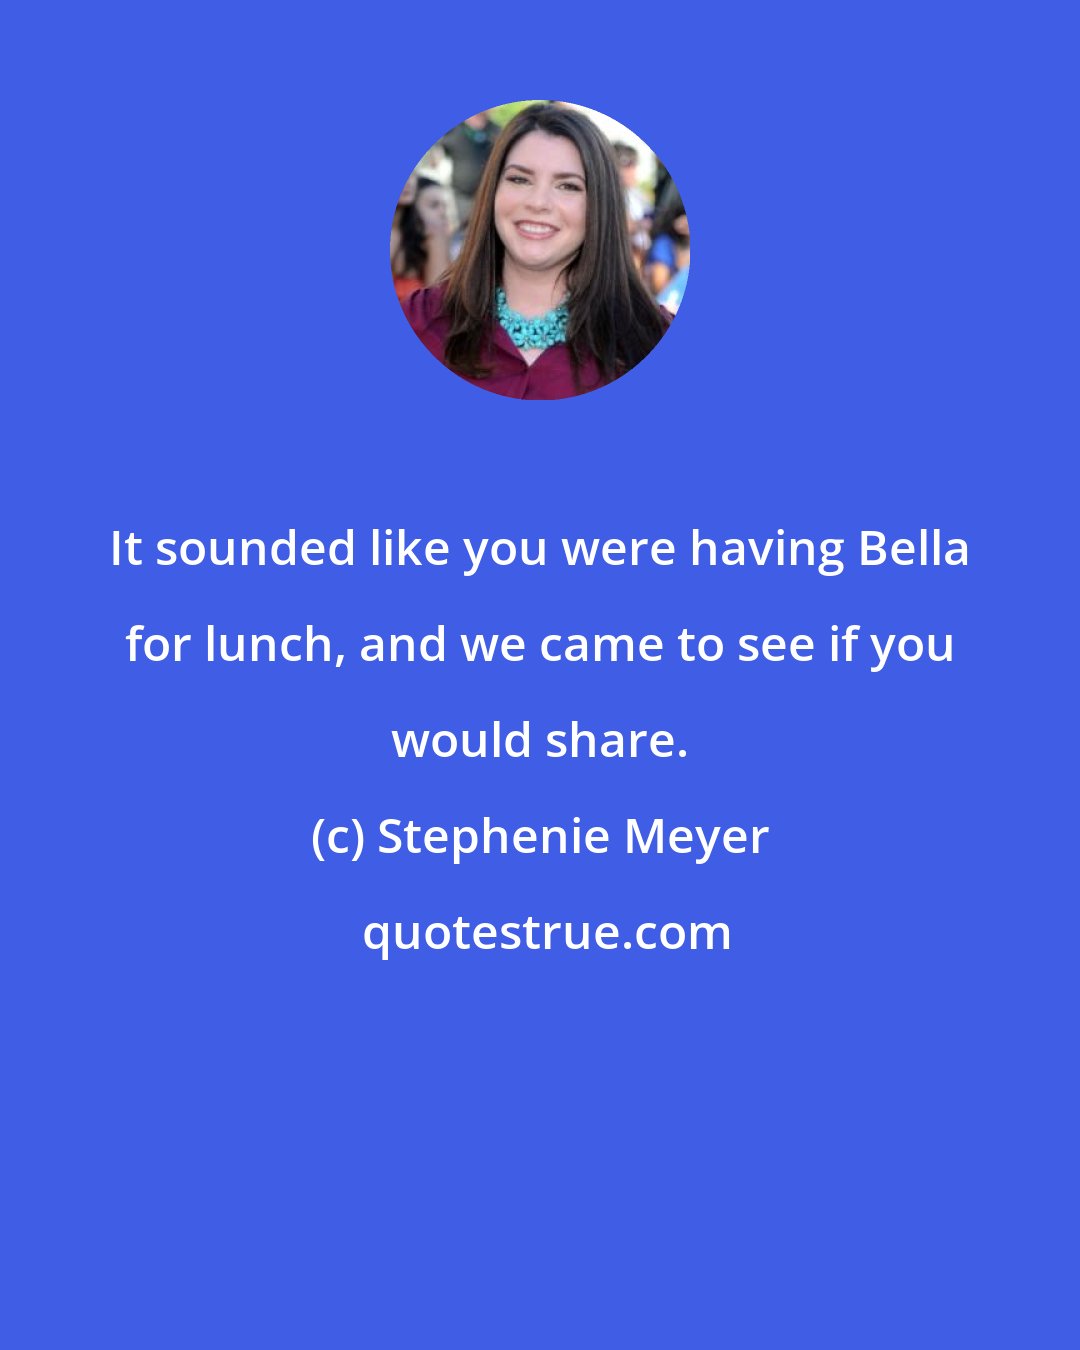 Stephenie Meyer: It sounded like you were having Bella for lunch, and we came to see if you would share.